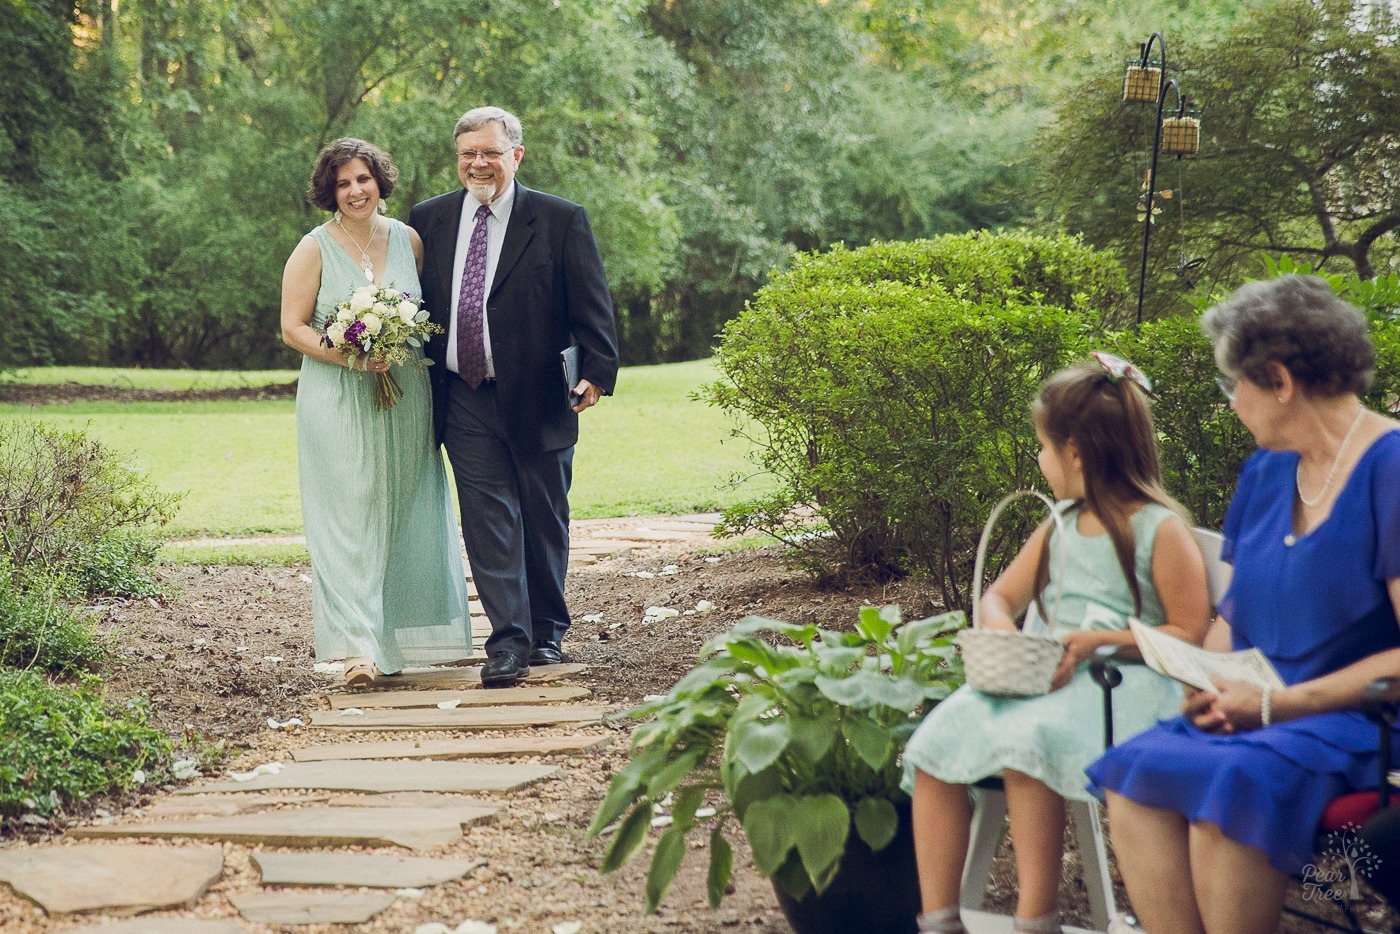 Dad and officiant walking his daughter down a stone path during her wedding in a backyard